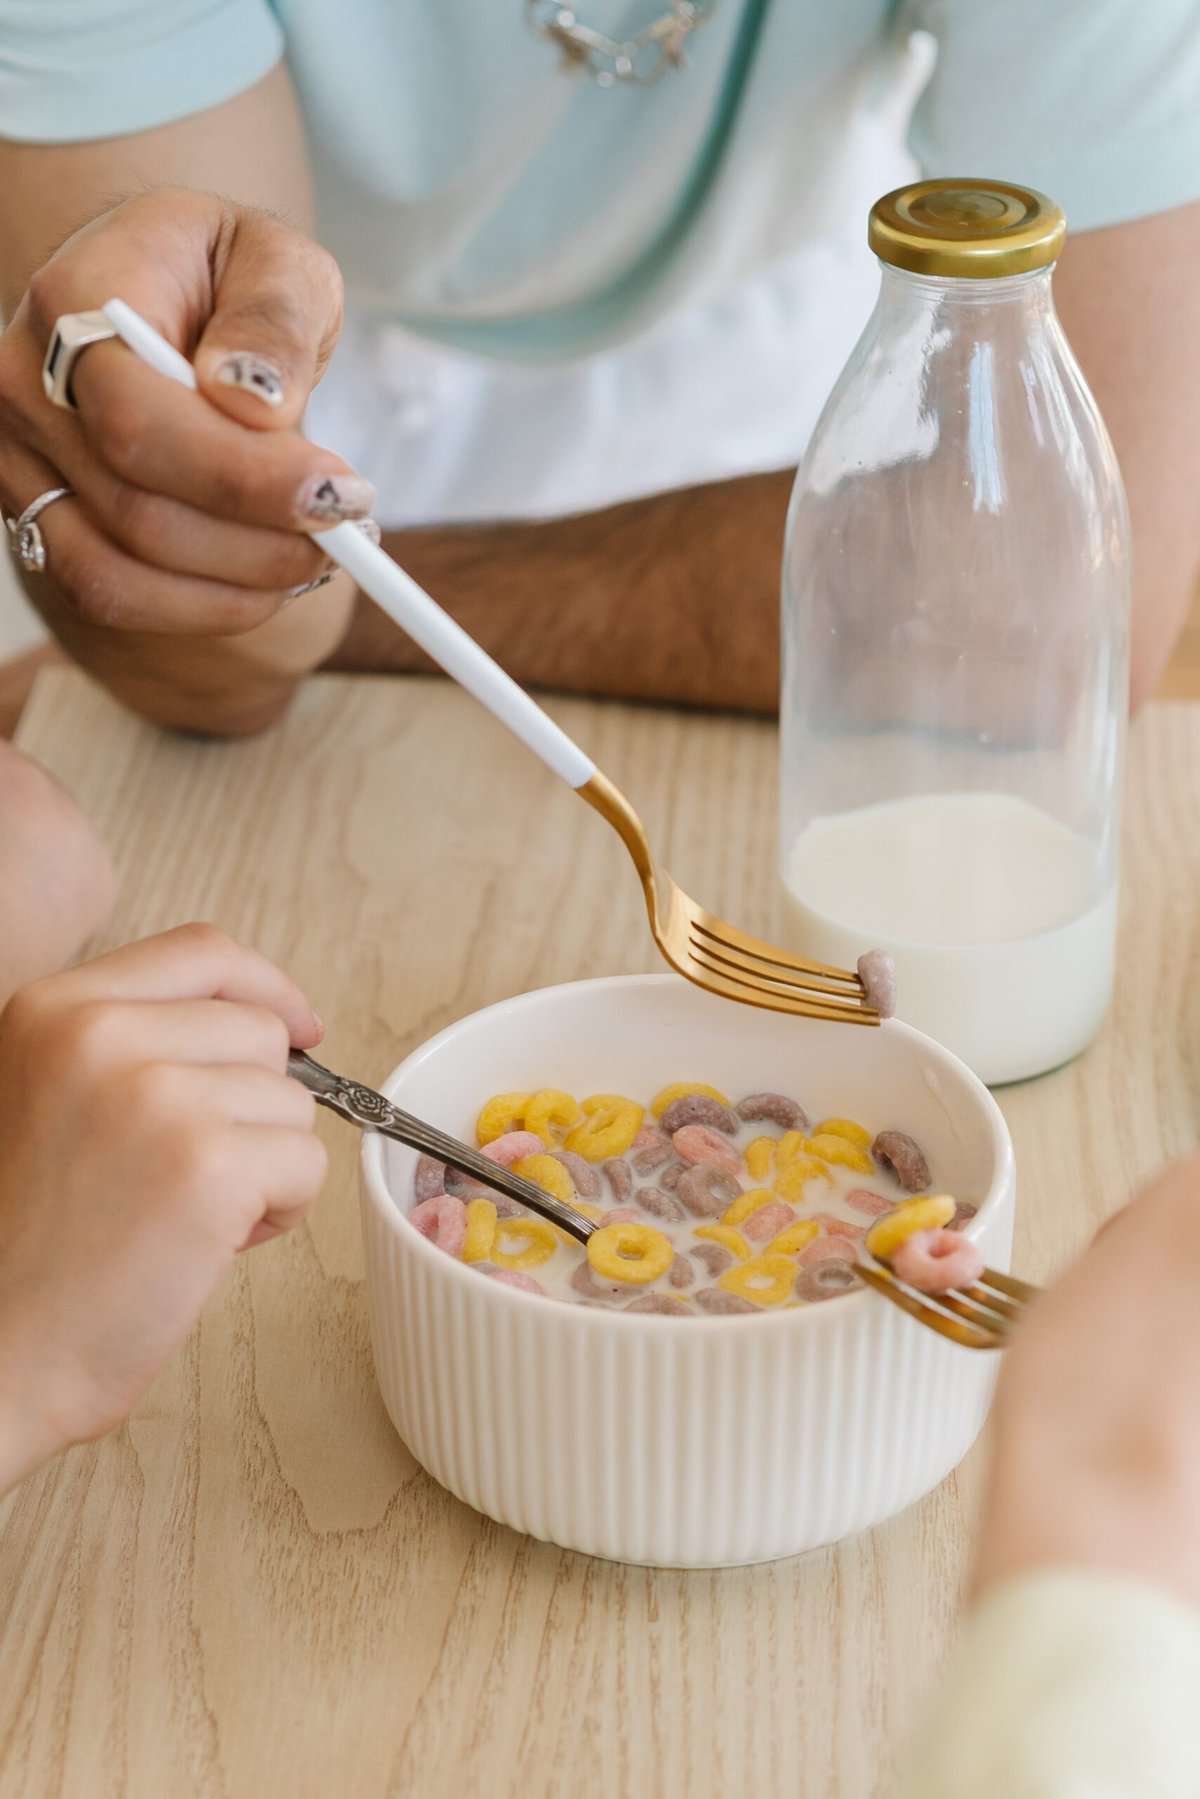 Gluten Free Cereal in a white bowl with two spoons and milk